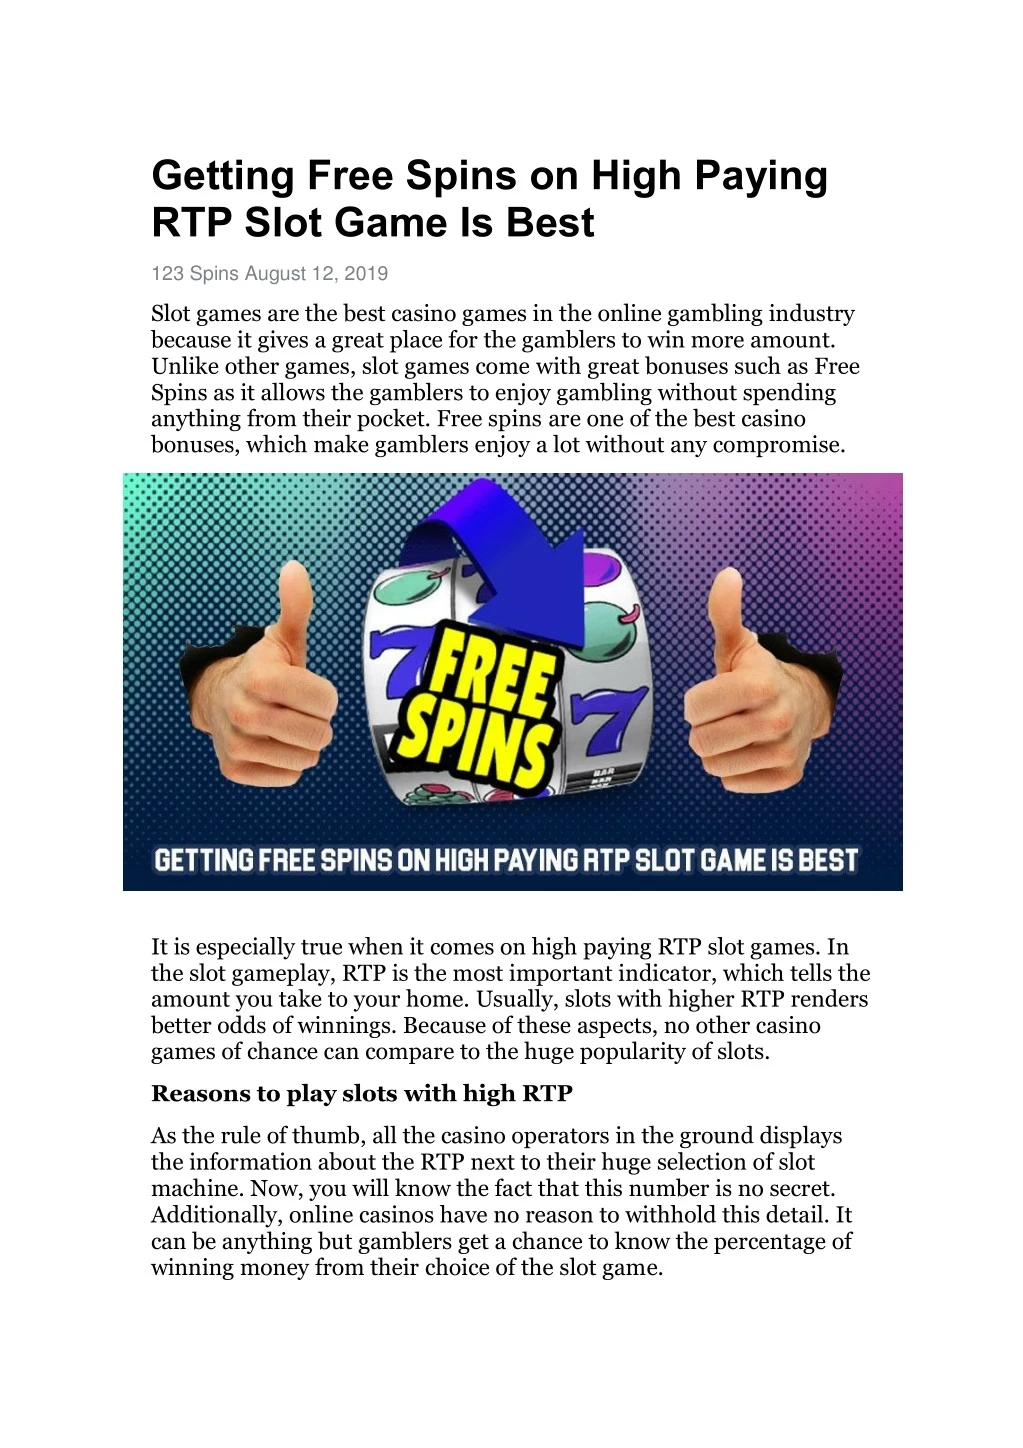 getting free spins on high paying rtp slot game